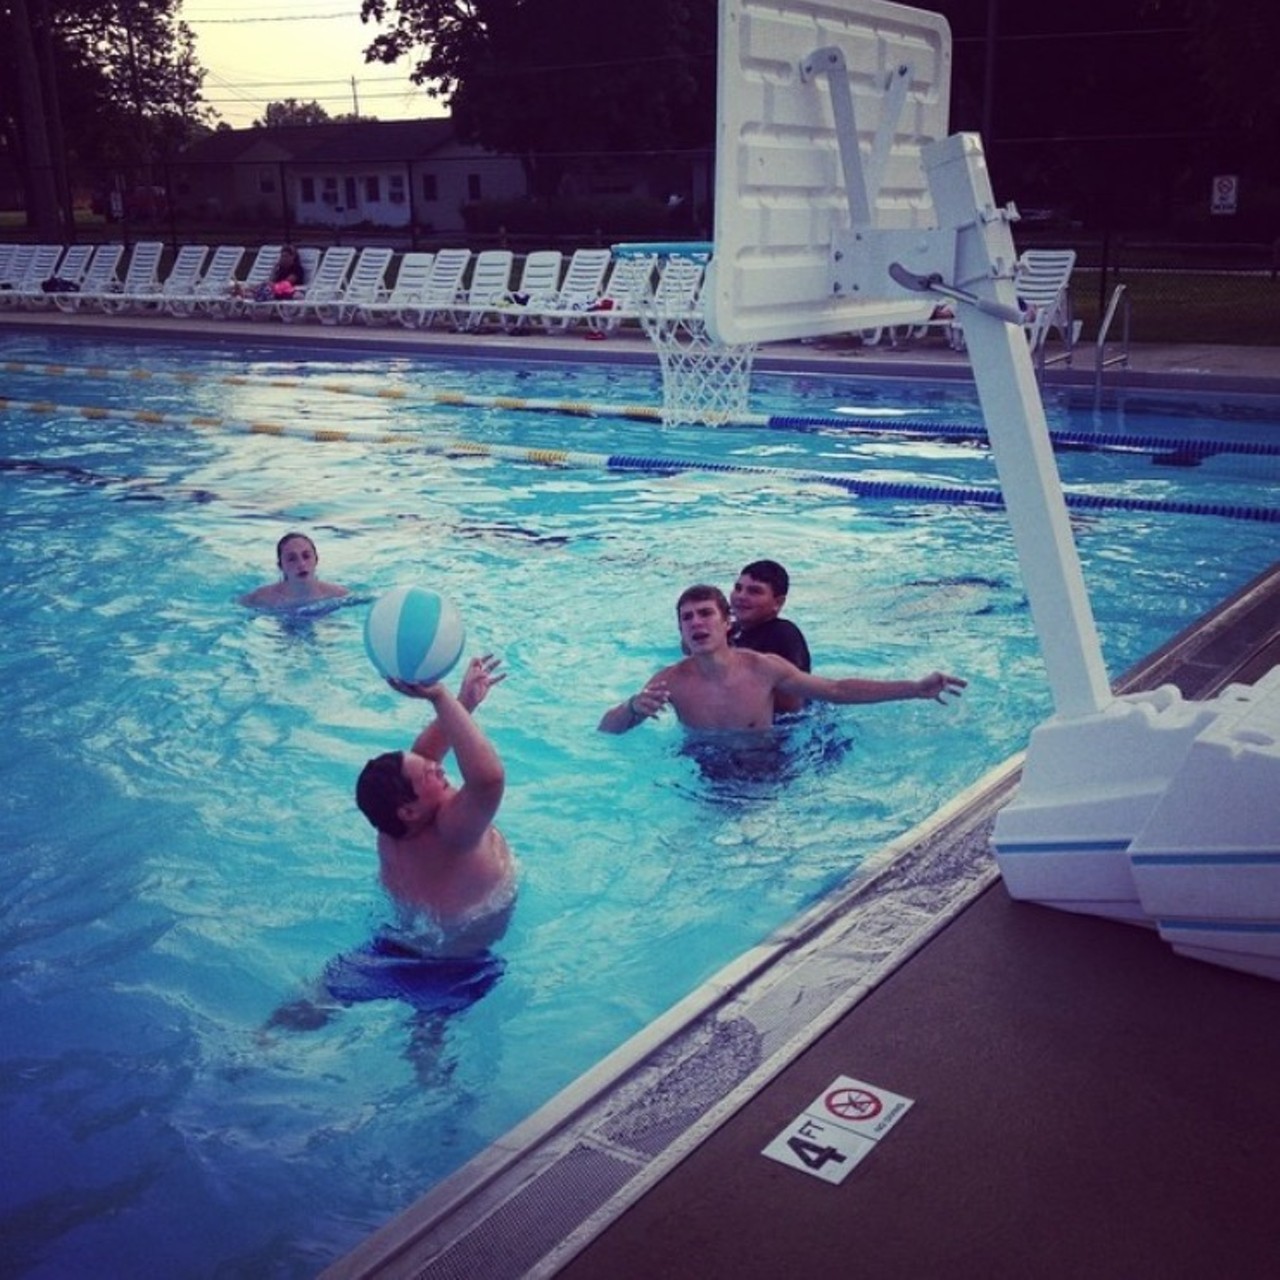 Osborn Park Pool - Water sports are fun. Check it out at 38575 Lakeshore Blvd
Willoughby, OH
(Photo courtesy of Instagram user @Rockitdj24)